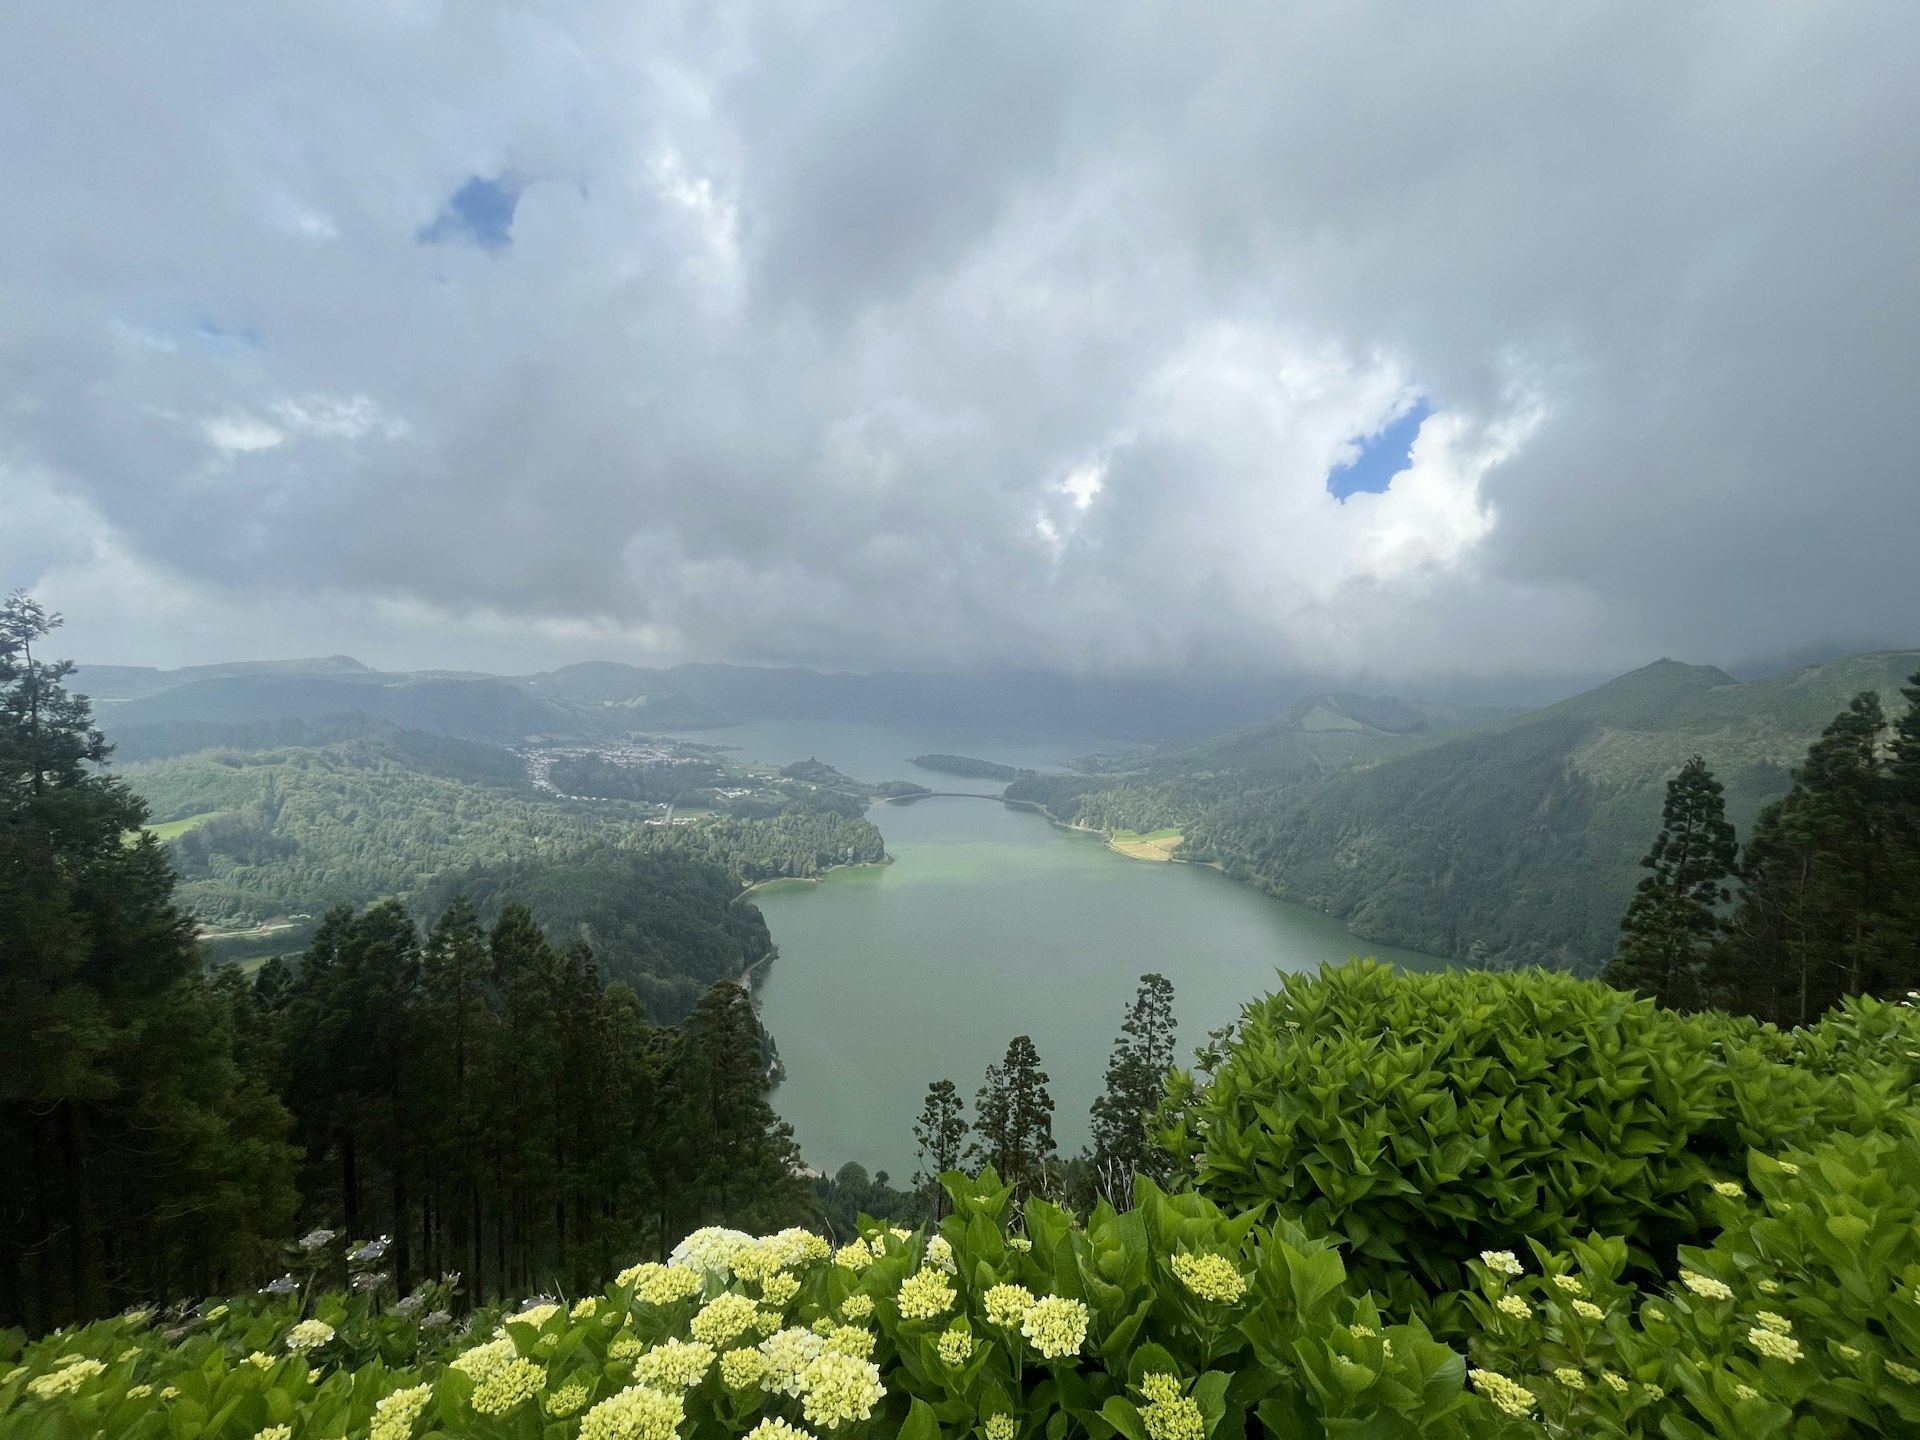 An image of a lake in the Azores from a high viewpoint